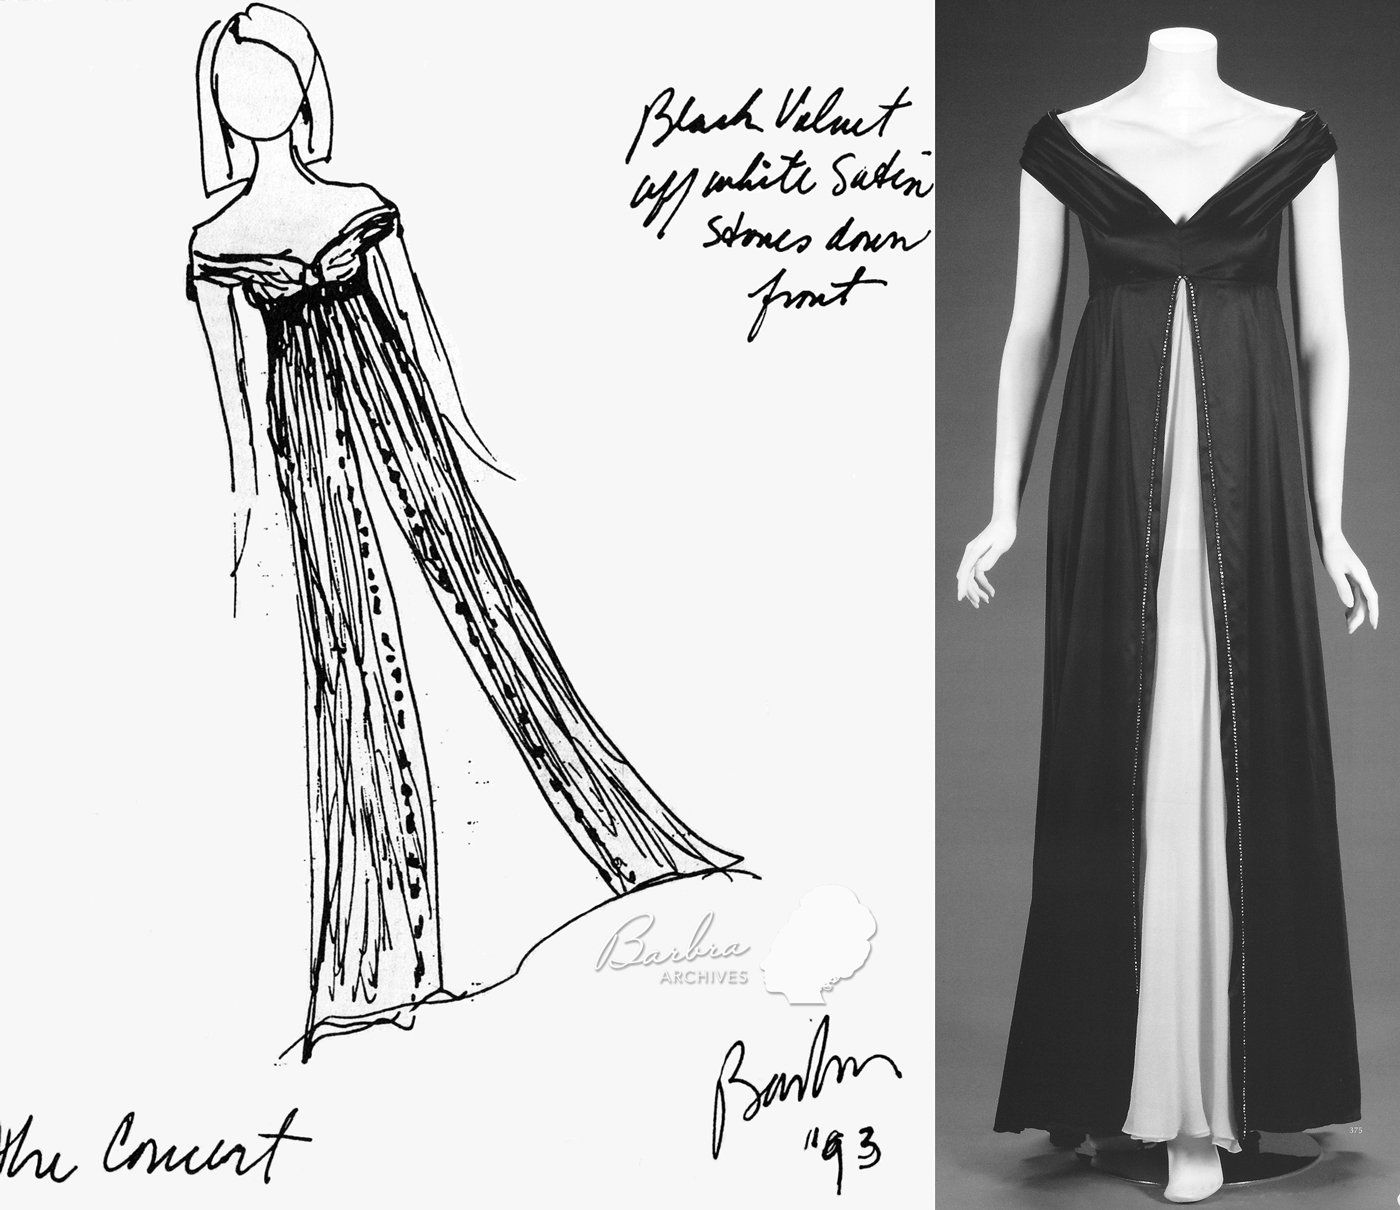 Streisand's original sketch of her MGM Grand gown, next to a photograph of the final gown she wore.